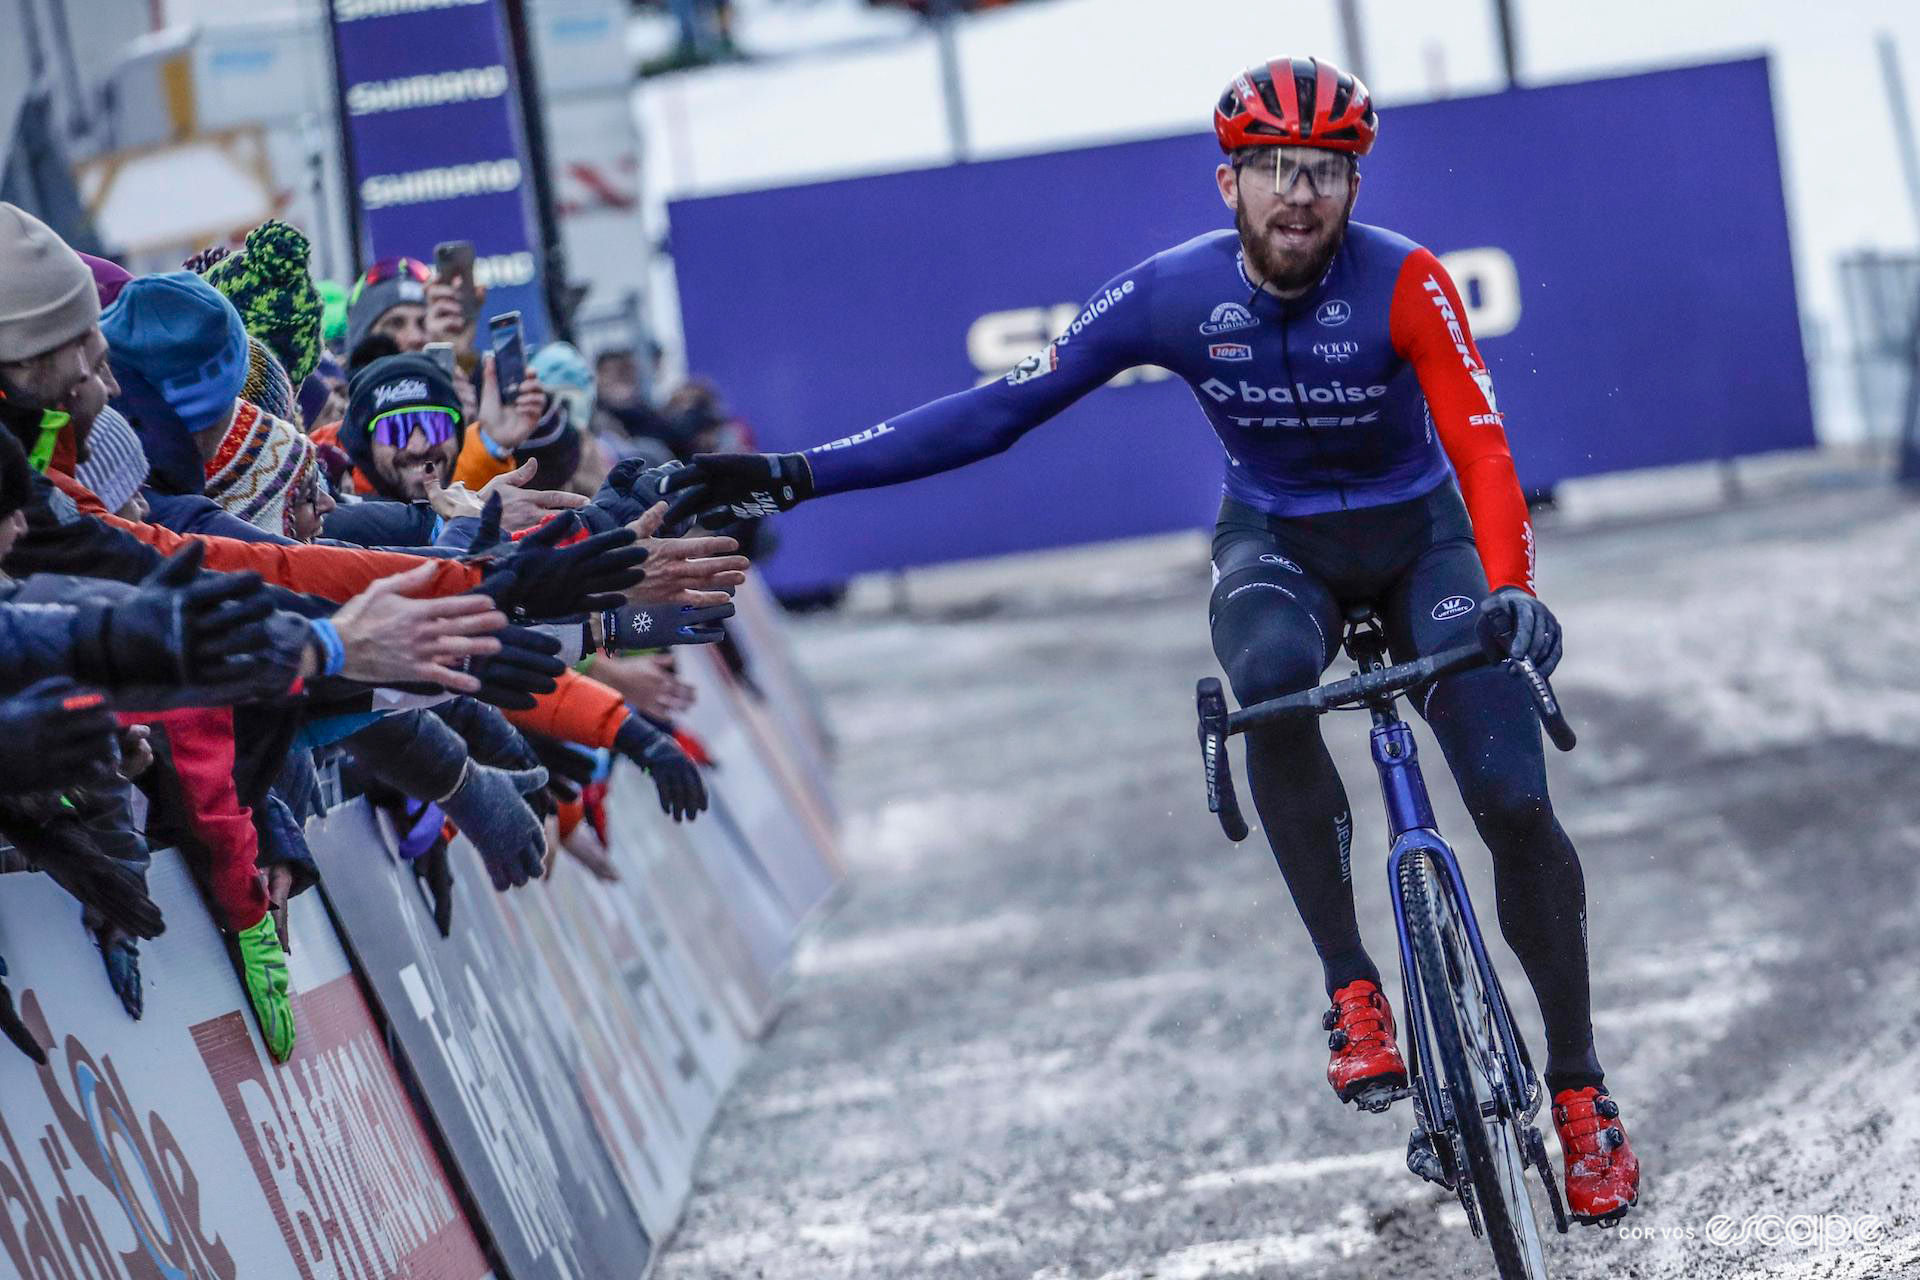 Joris Nieuwenhuis gives high-fives to the crowd as he rides the finishing straight to victory at UCI Cyclocross World Cup Val di Sole.